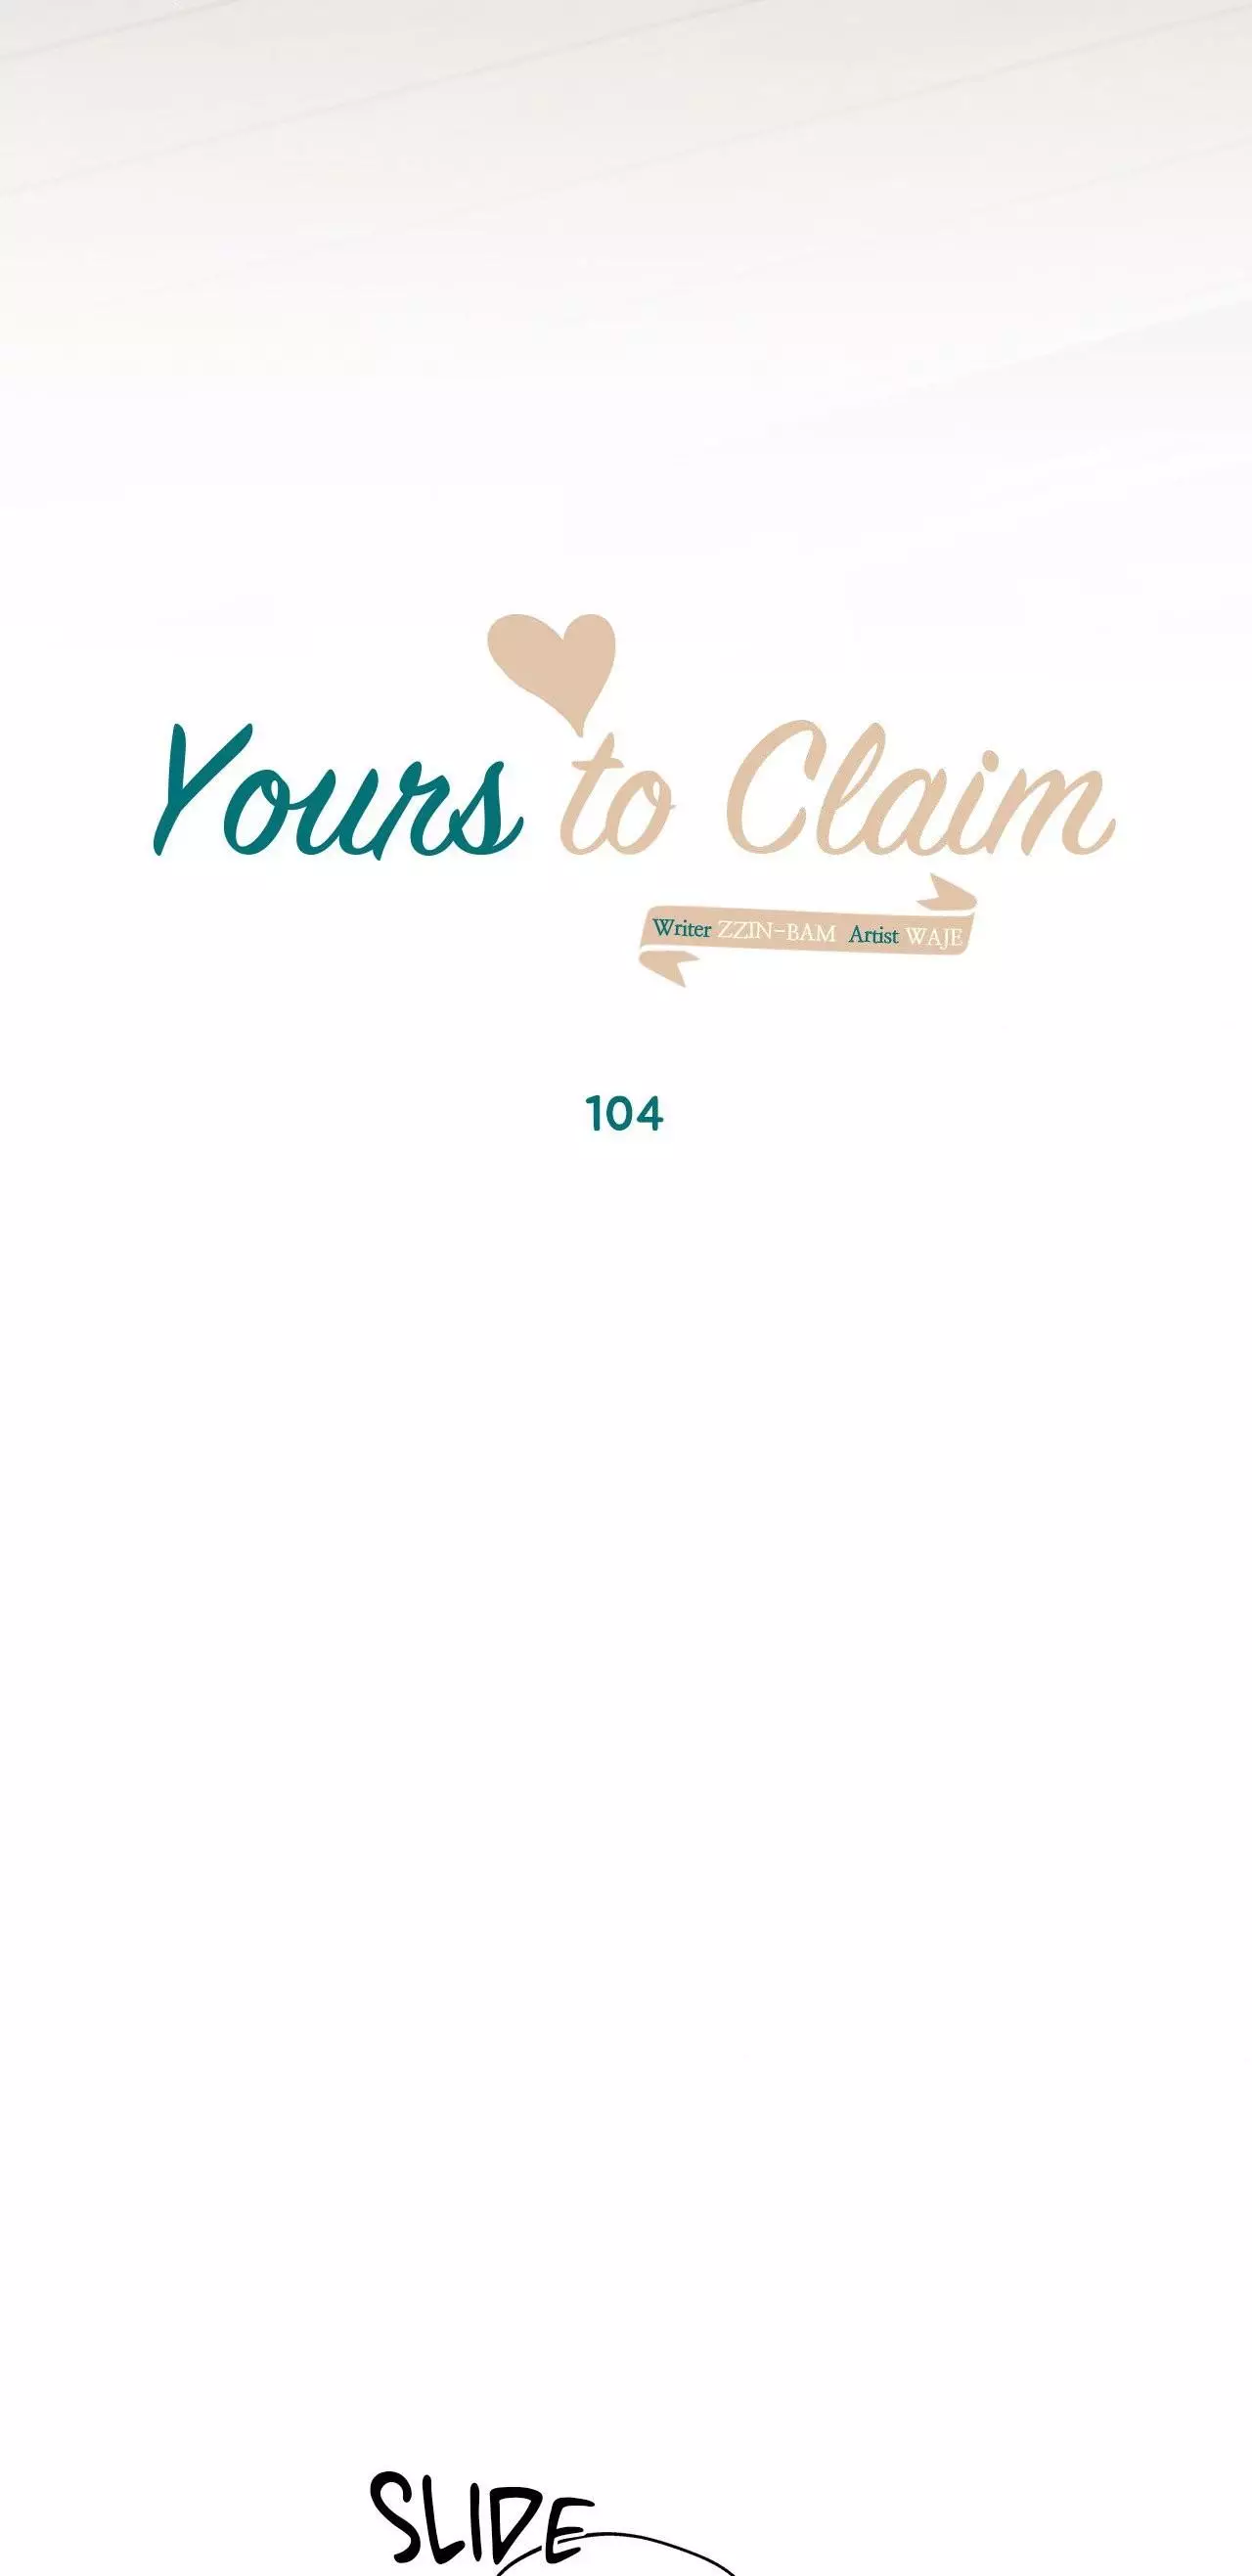 Yours To Claim - 104 page 13-6a85bda6